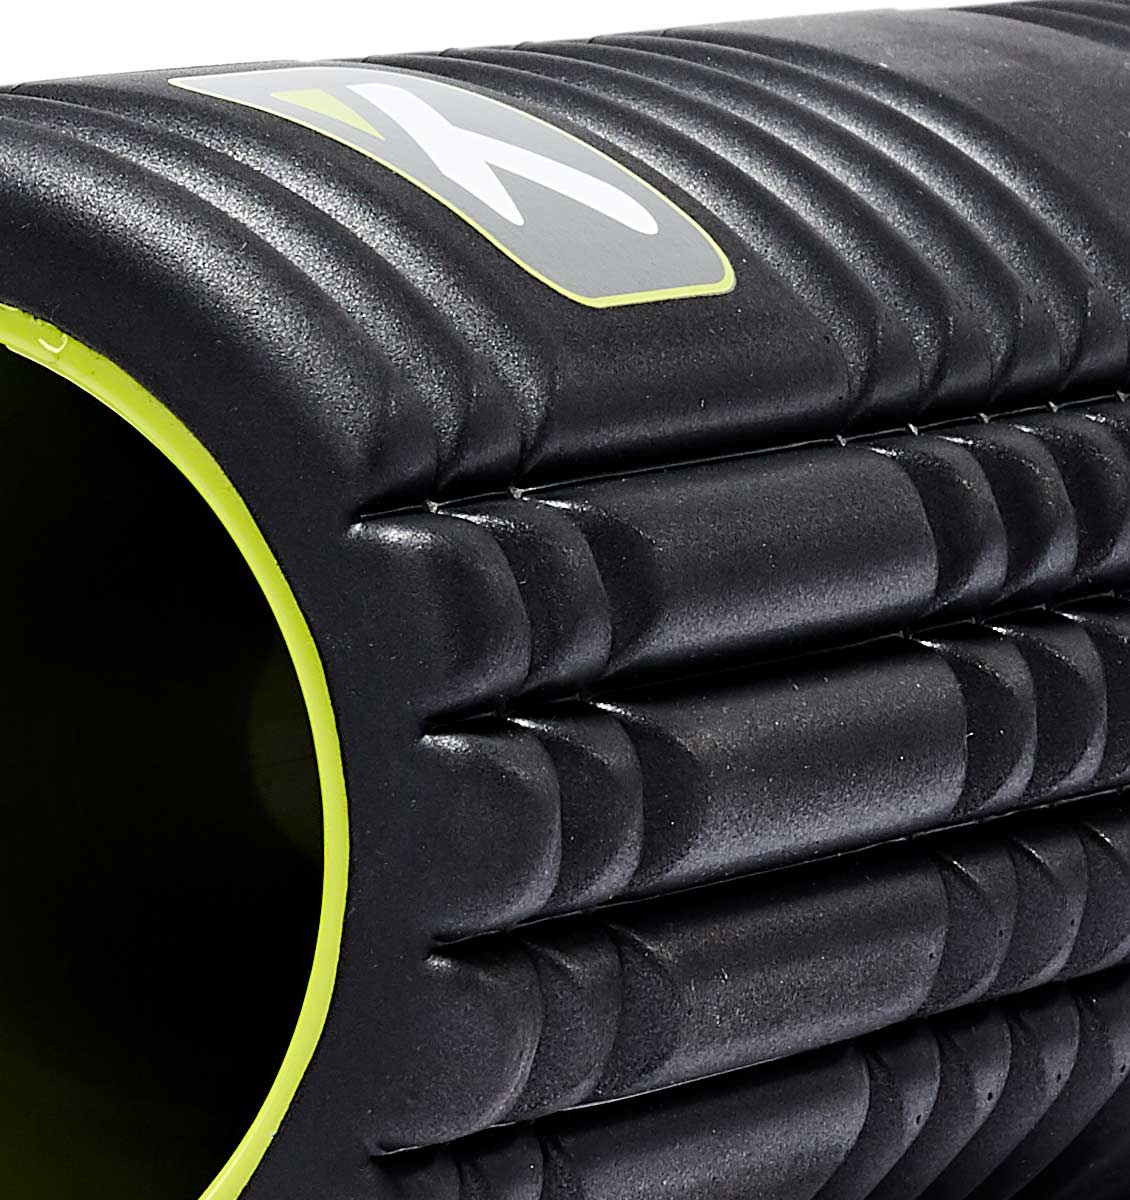 TPT3GRD2BWS0000 TriggerPoint The Grid 2.0 Foam Roller Black - 45 Degree Angle - Close Up